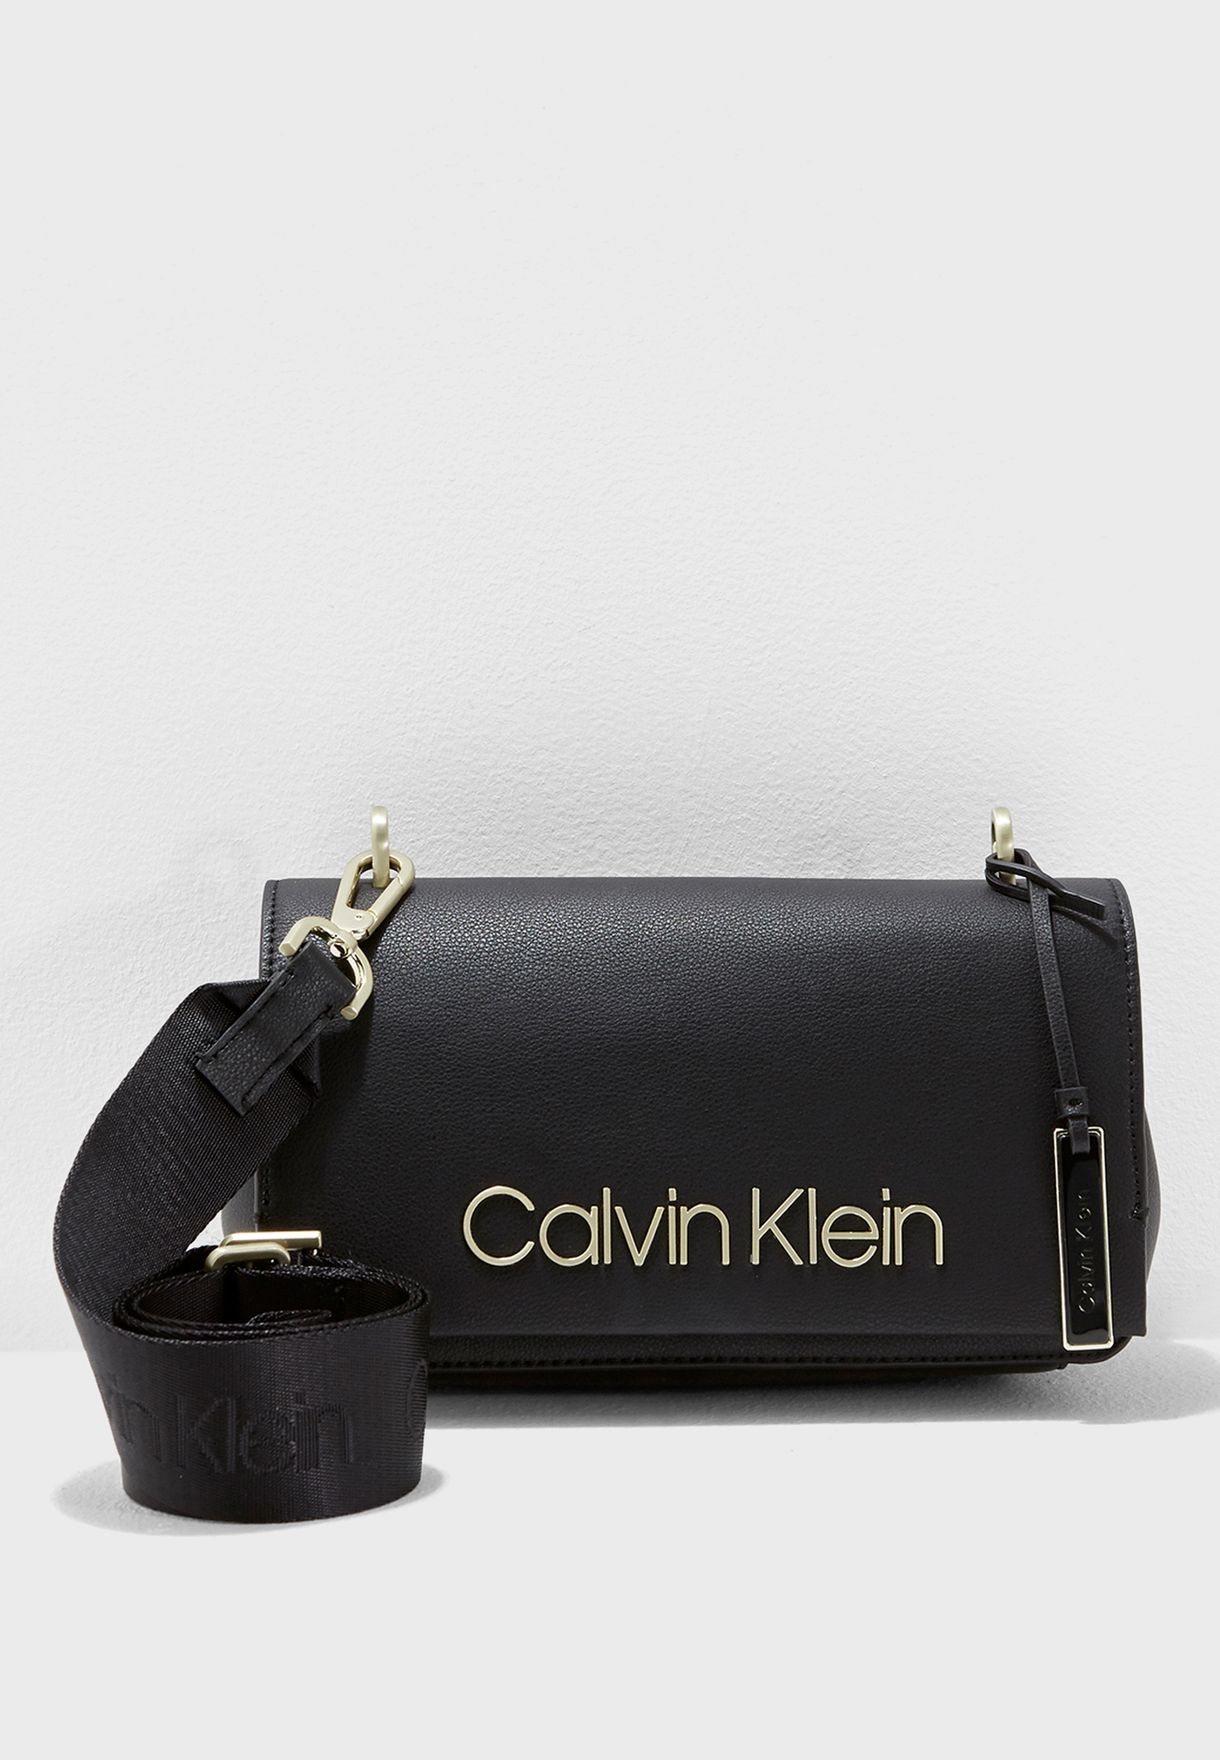 butterfly playground Excursion Buy Calvin Klein black Candy Crossbody for Women in MENA, Worldwide